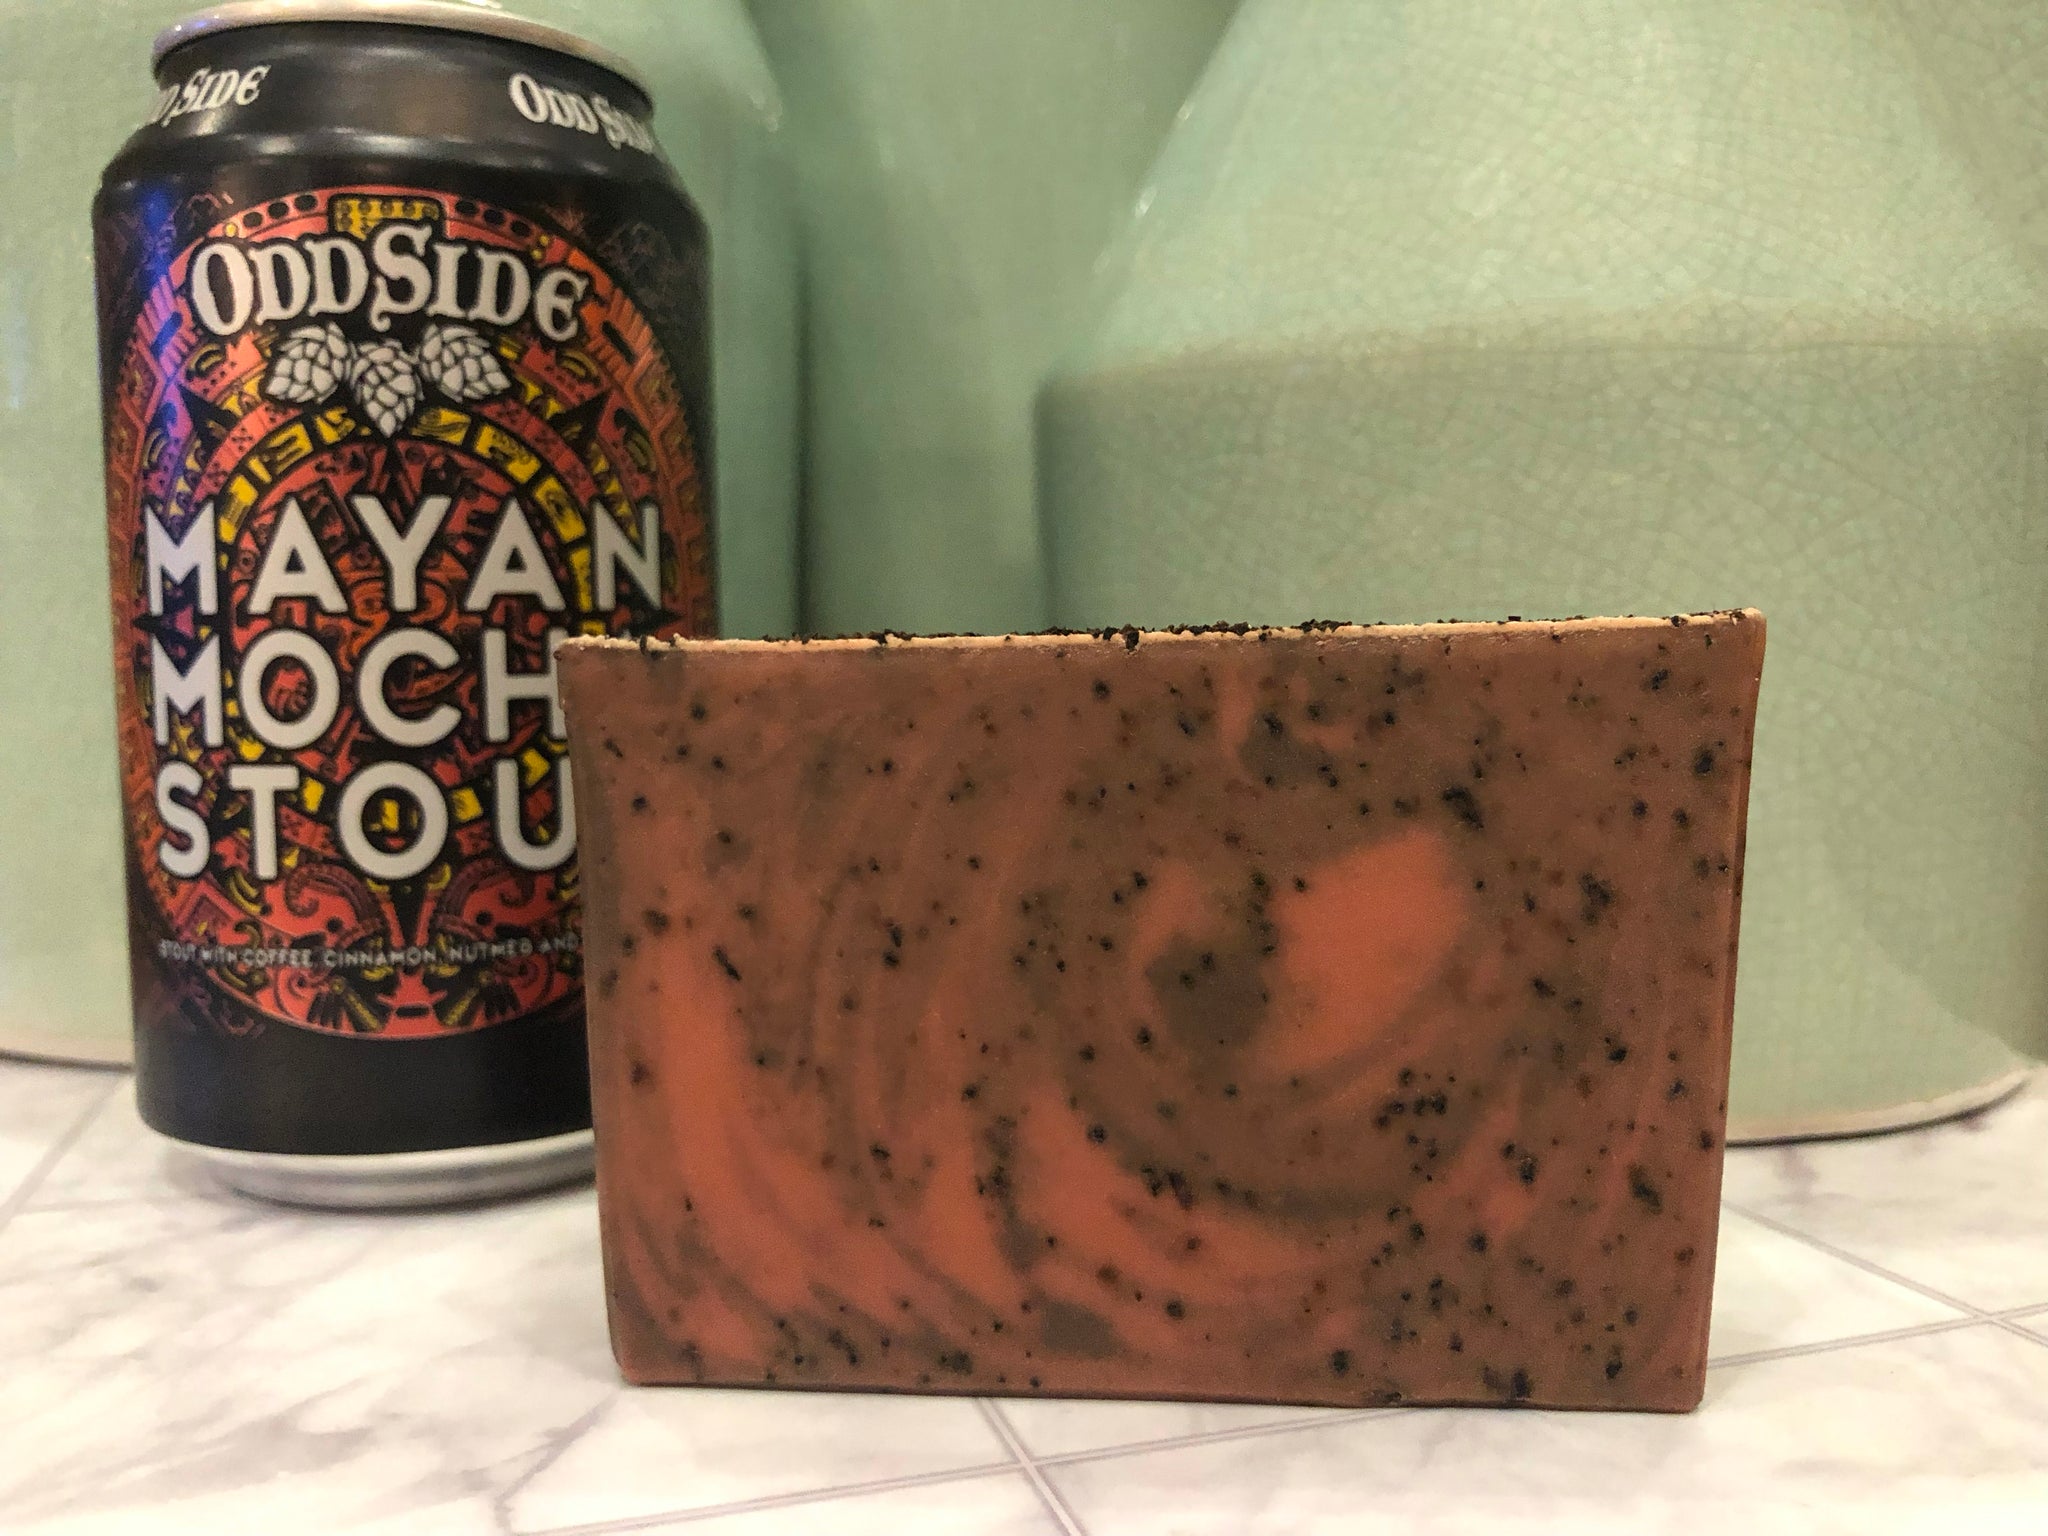 Michigan beer soap handcrafted with mayan mocha stout Michigan craft beer from odd side ales grand haven Michigan craft brewery coffee beer soap for him with exfoliation cold process coffee beer soap with coffee grounds orange and brown swirl cold process soap with exfoliating coffee grounds handcrafted by spunkndisorderly craft beer soaps